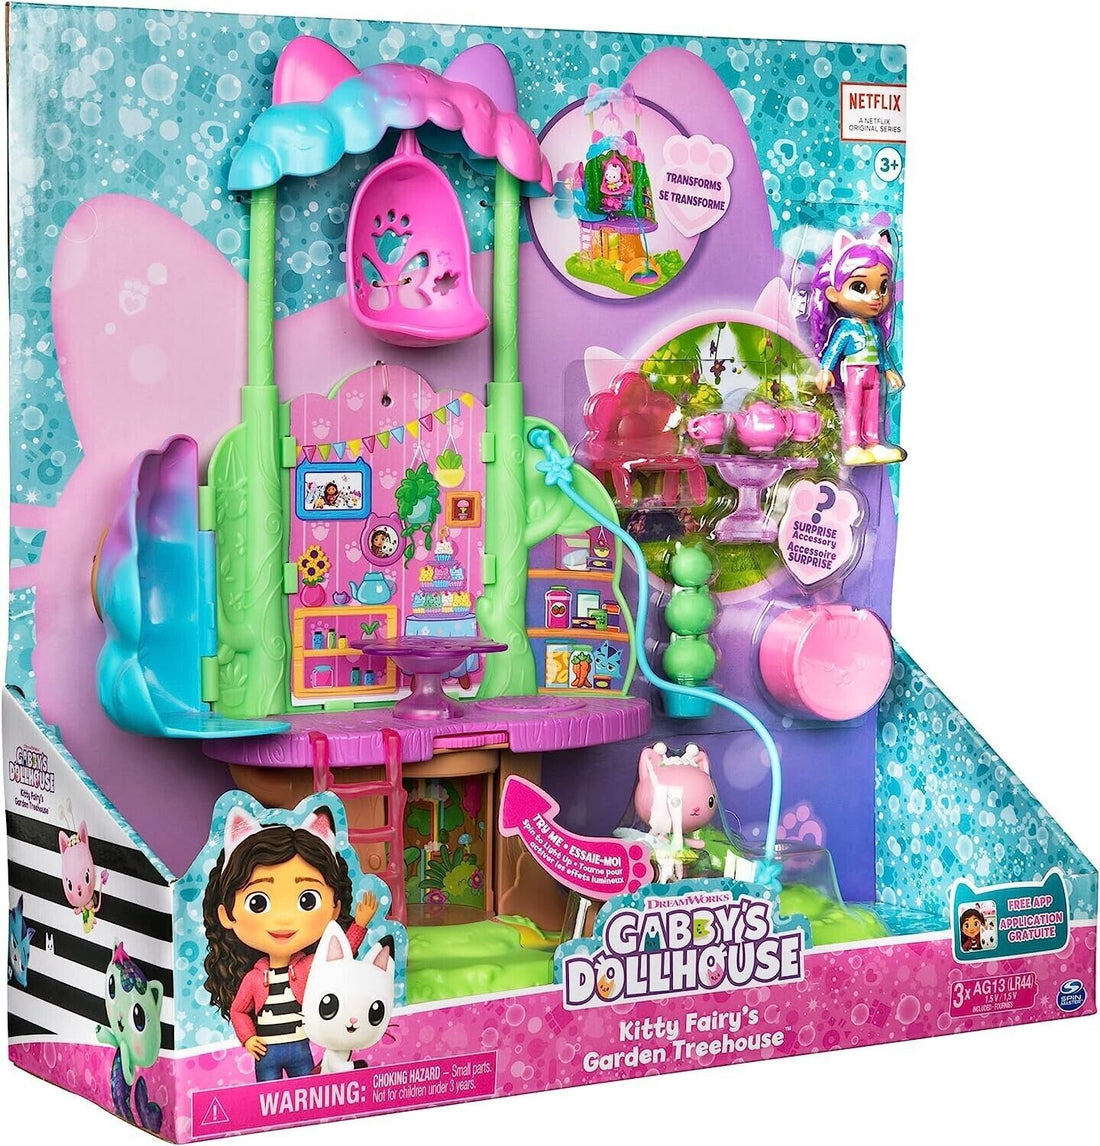 Gabby Dollhouse & Soft Toys, Vehicles, Playsets - Your Child's Dream Playtime! - Kitty Fairy's Garden Treehouse